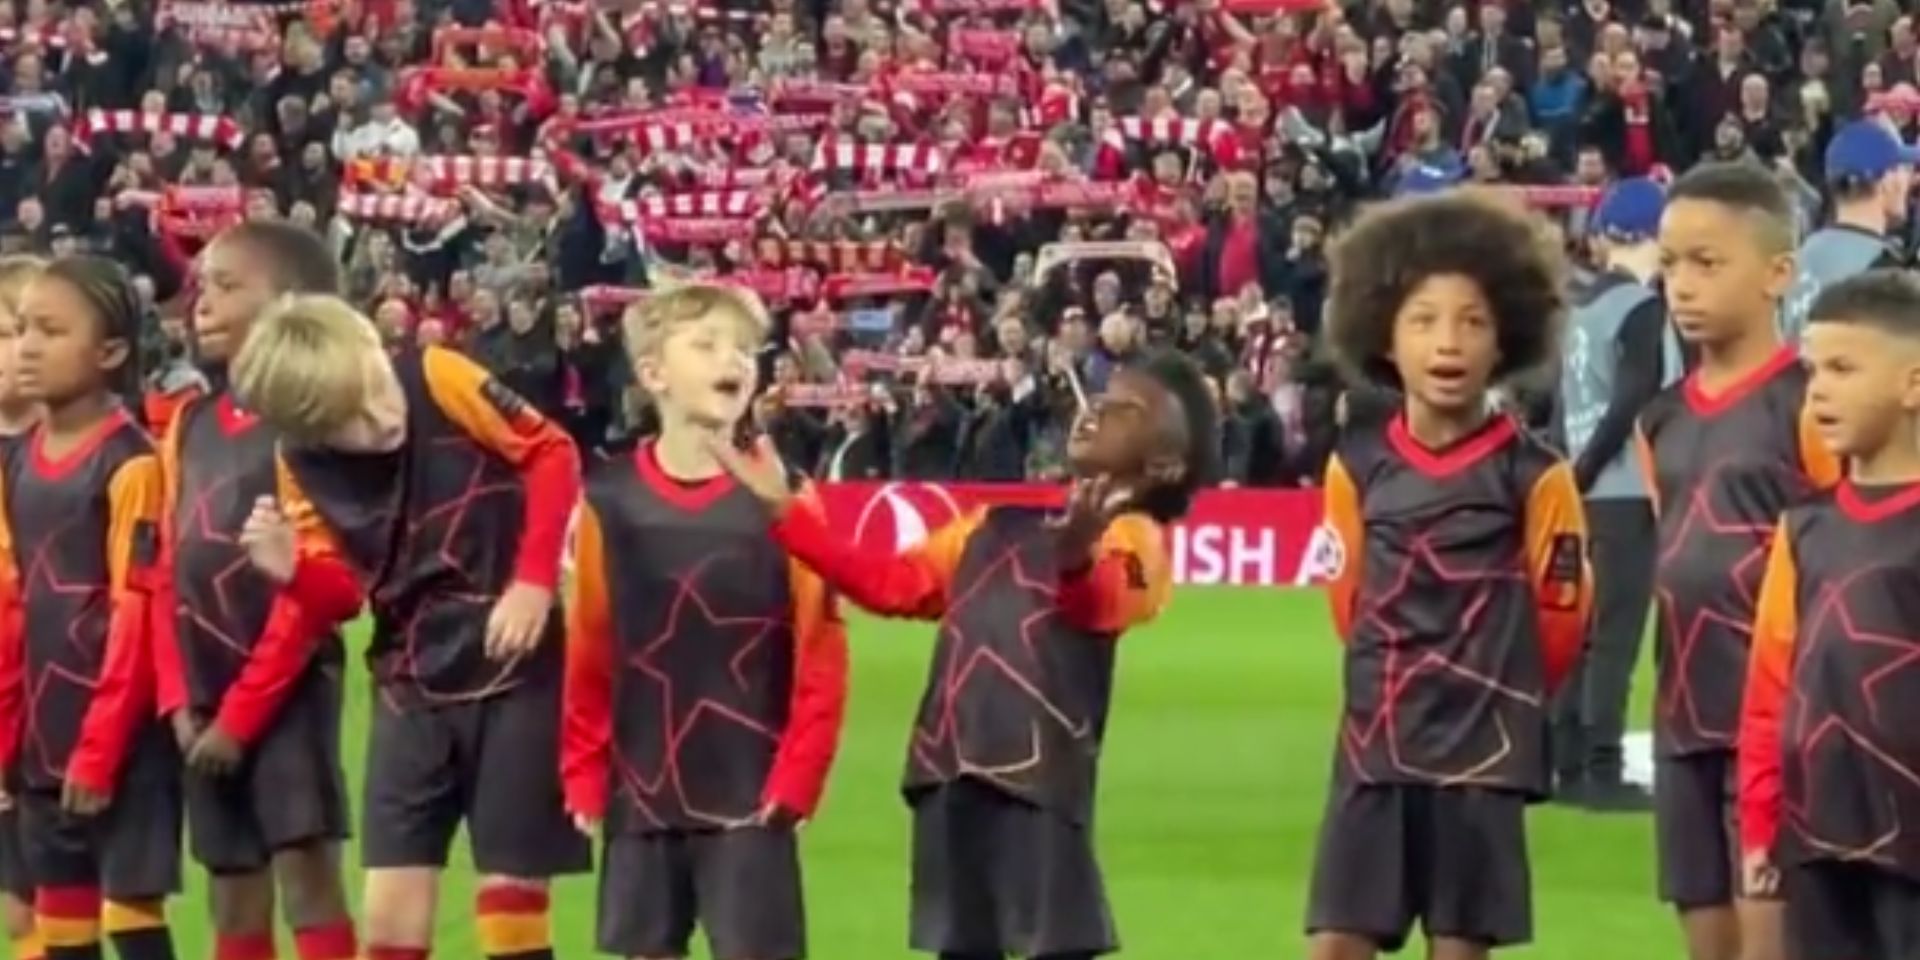 (Video) Adorable moment young UEFA mascots join in with Anfield crowd singing ‘You’ll Never Walk Alone’